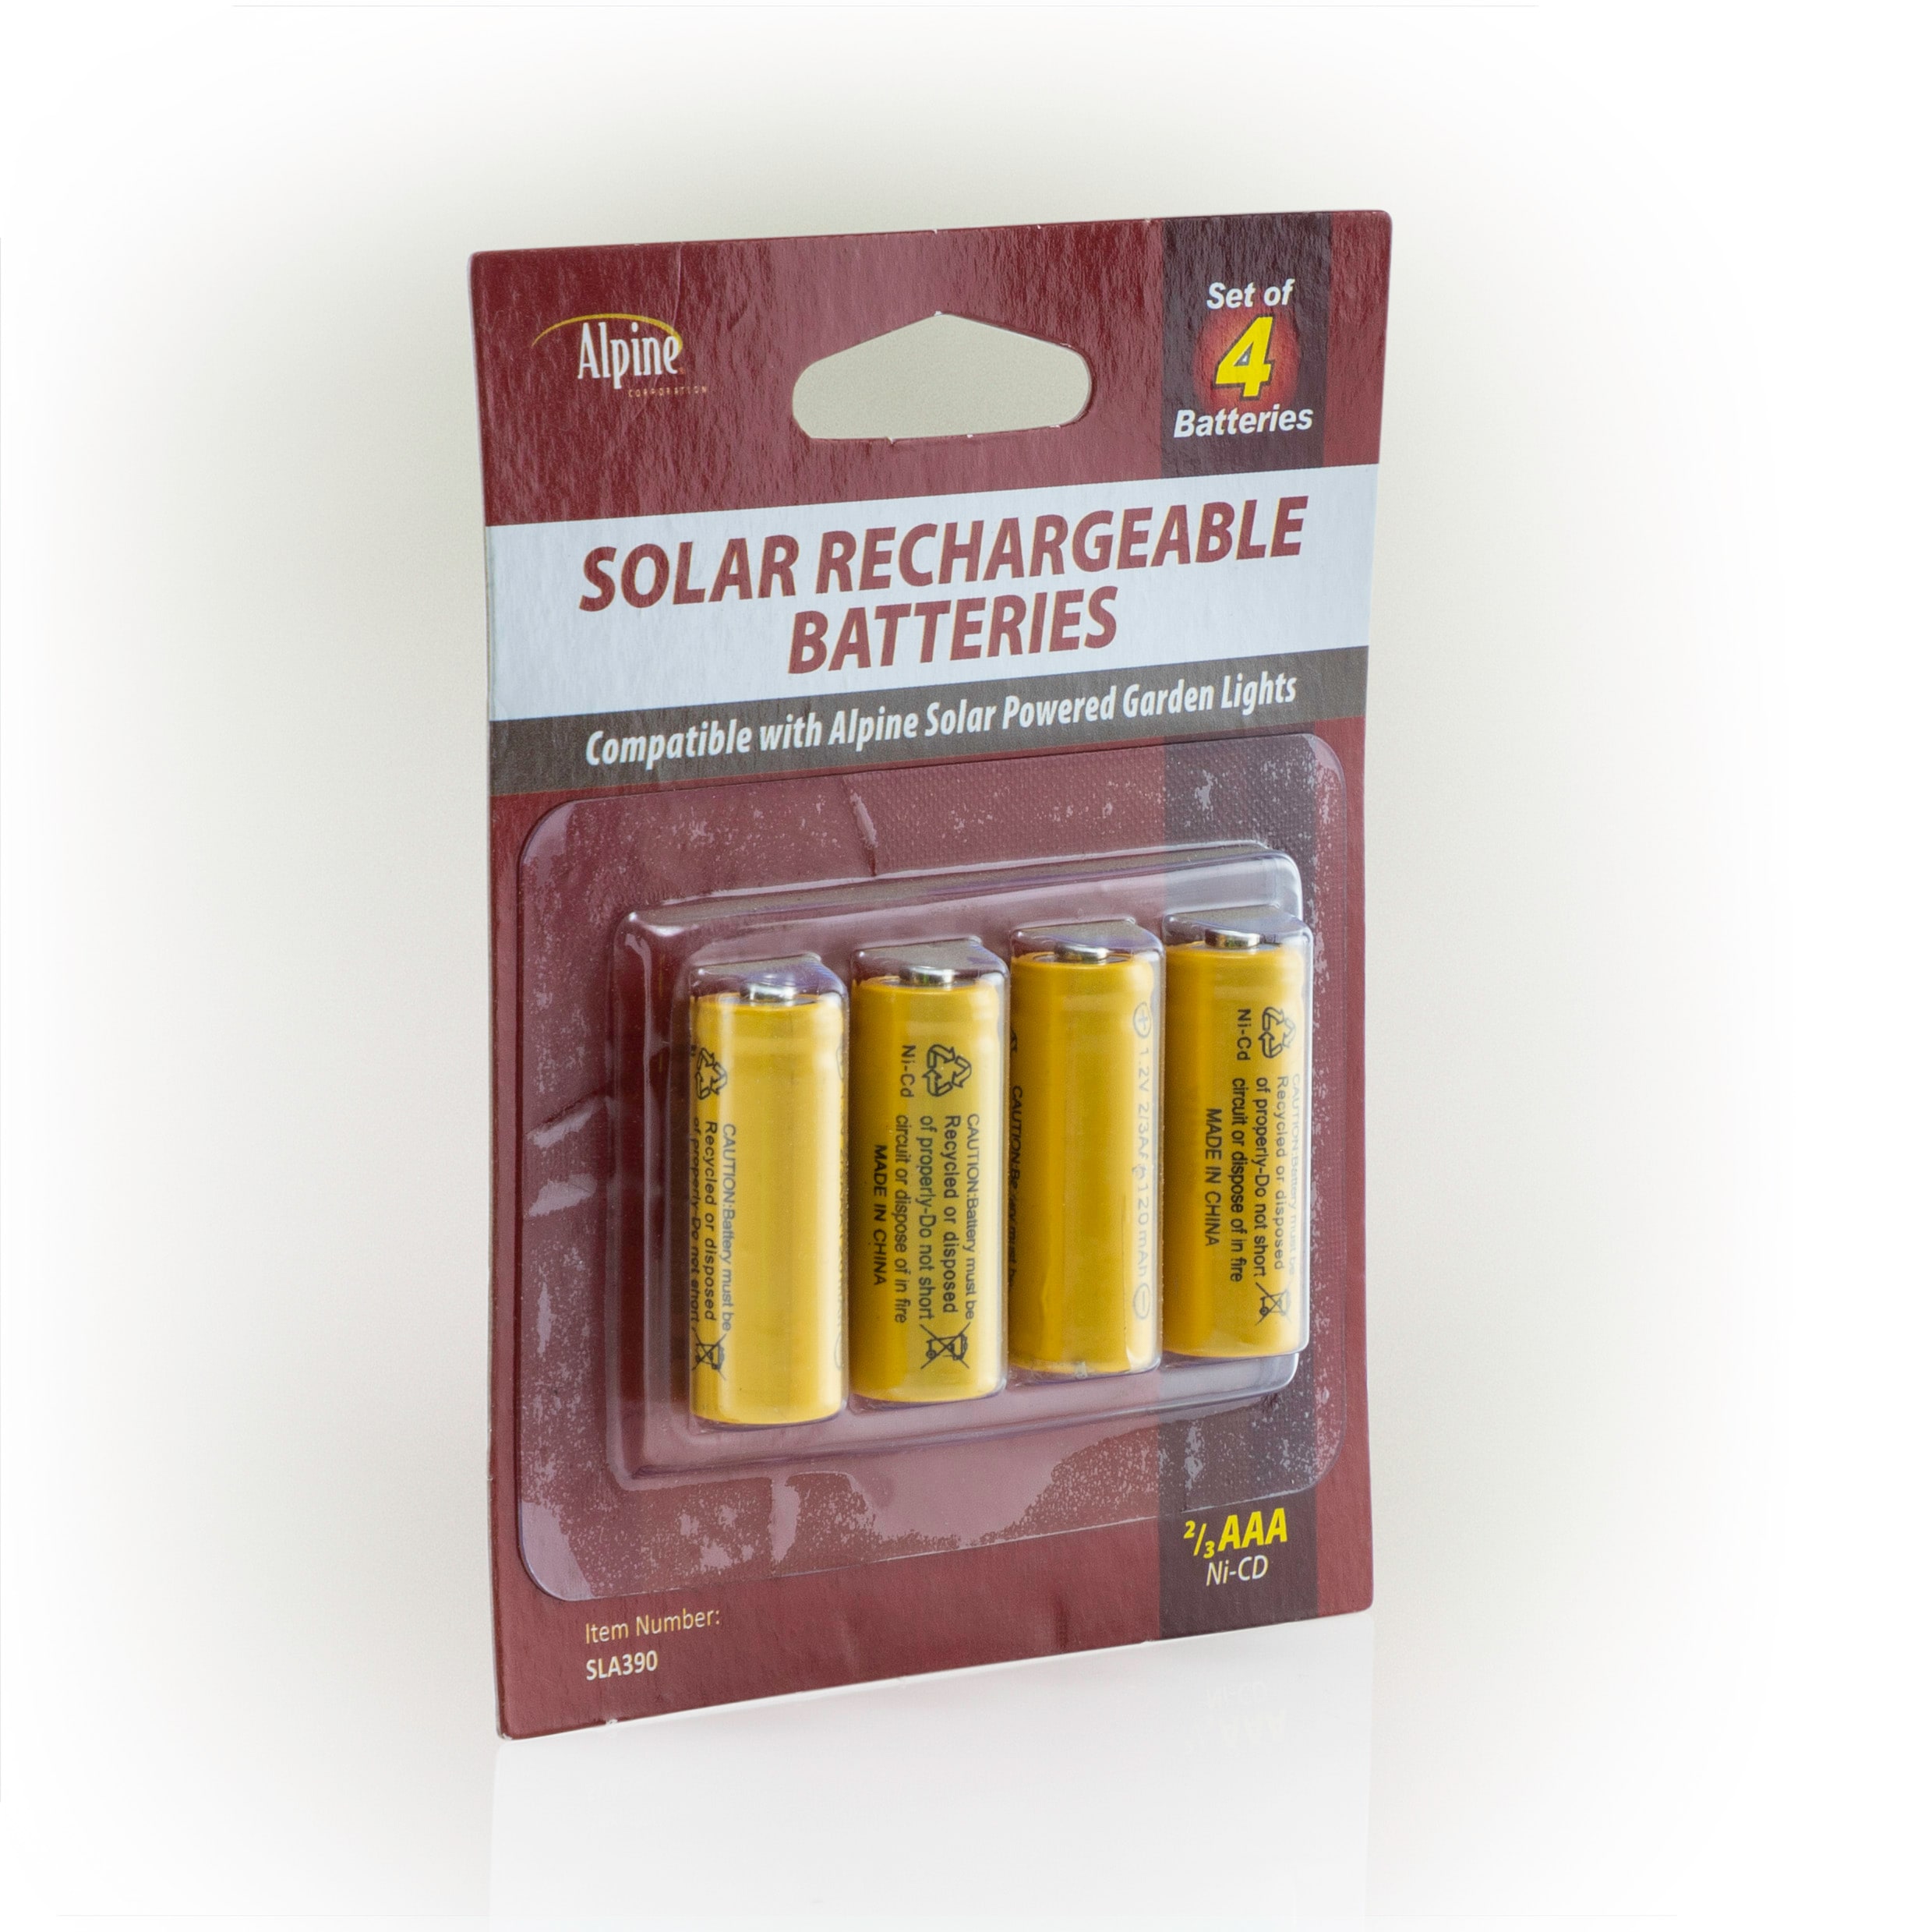 Energy Accessories - 1.2v Ni-mh 2/3 Rechargeable Battery